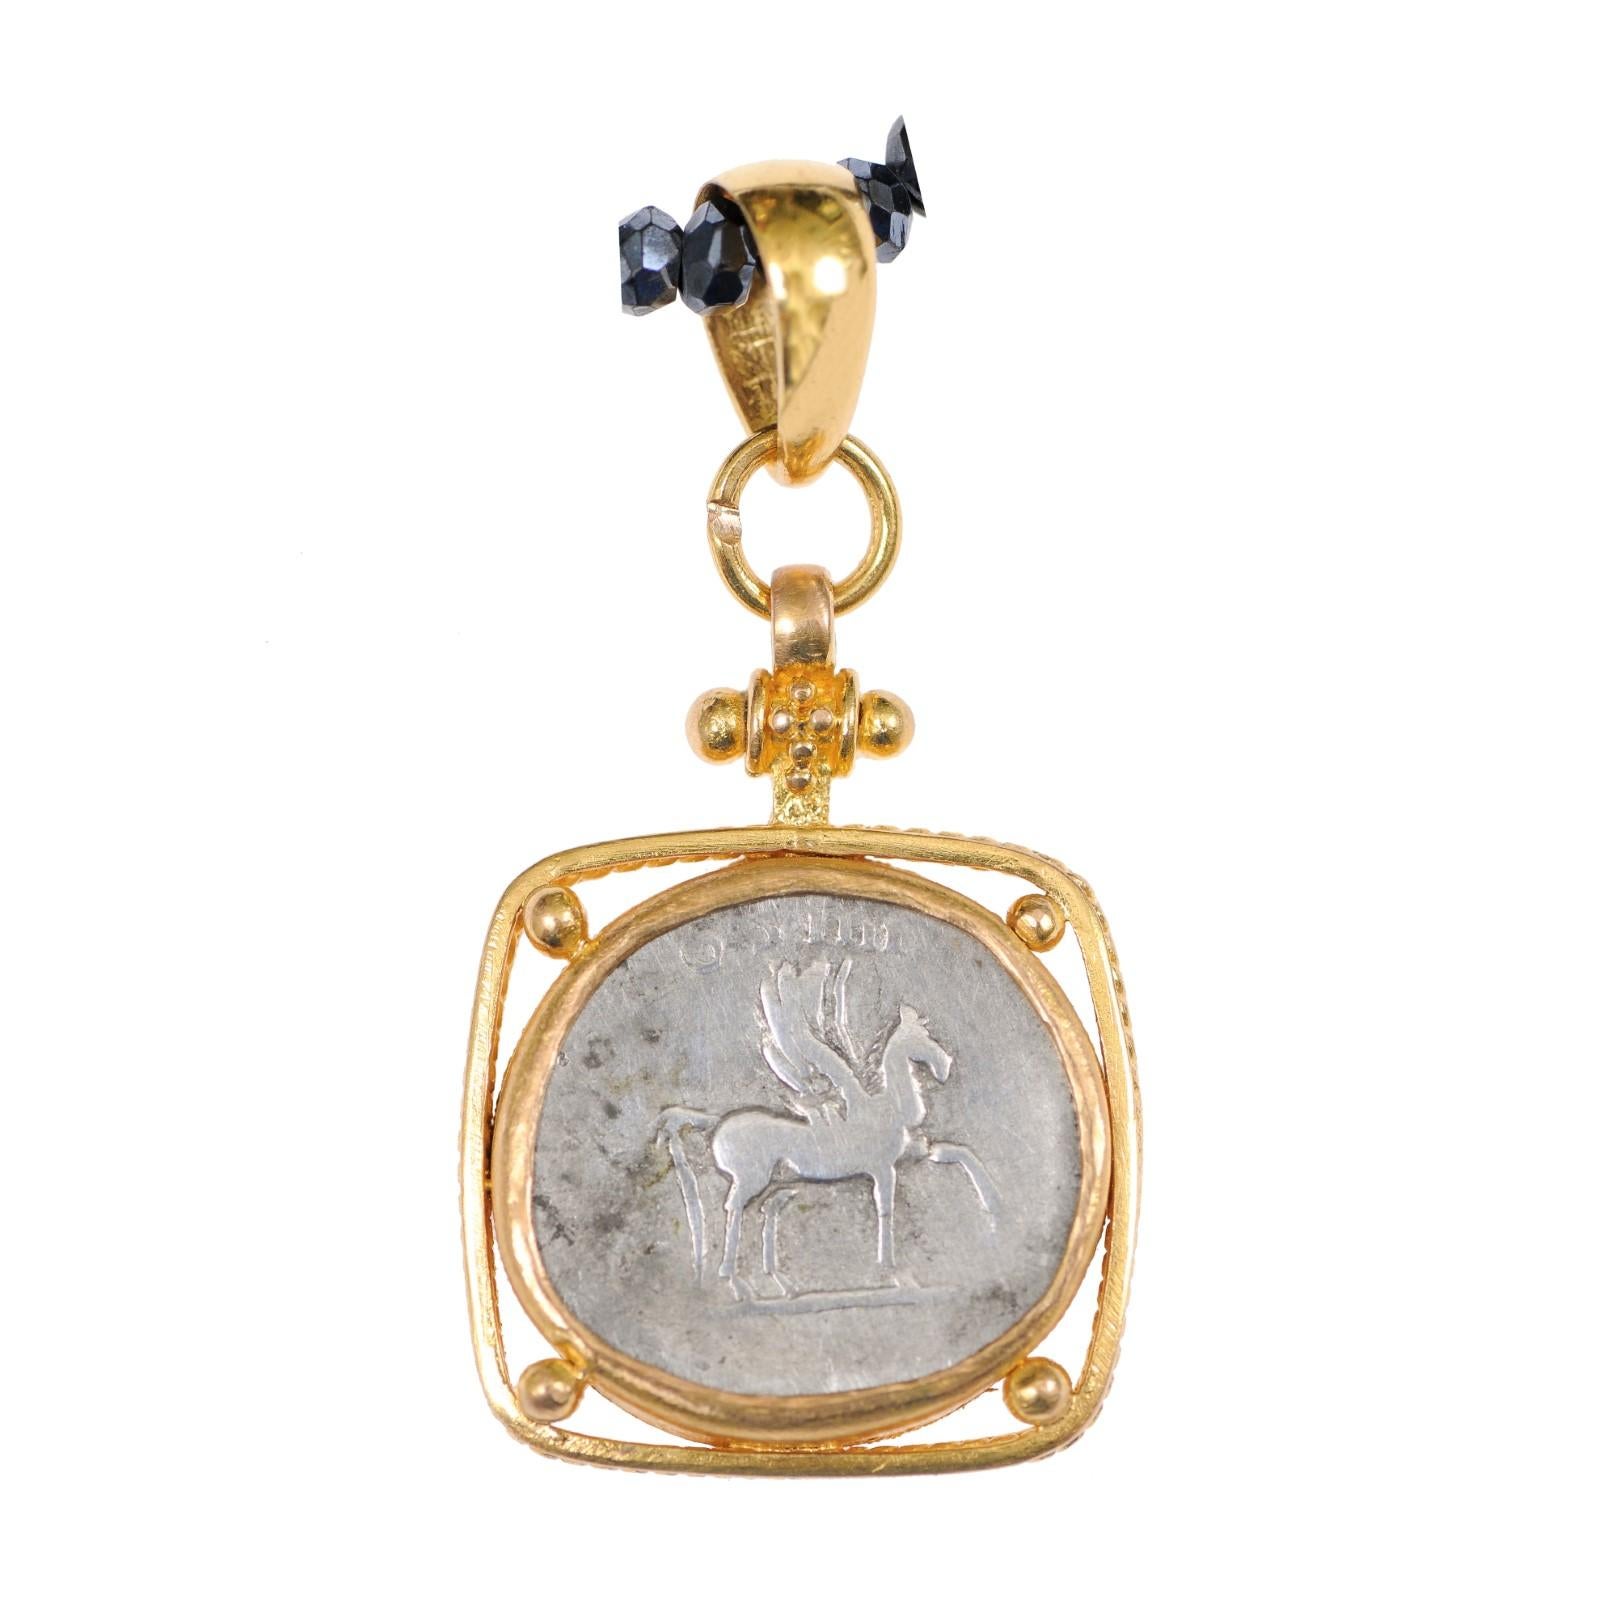 An authentic Roman Empire, Domitian (circa 81-96 AD), silver coin, set in a custom 22-karat gold bezel, suspended design with gold ball accents, and a 22-karat gold bail. The obverse, or front, side of this coin features Domitian, with Pegasus,